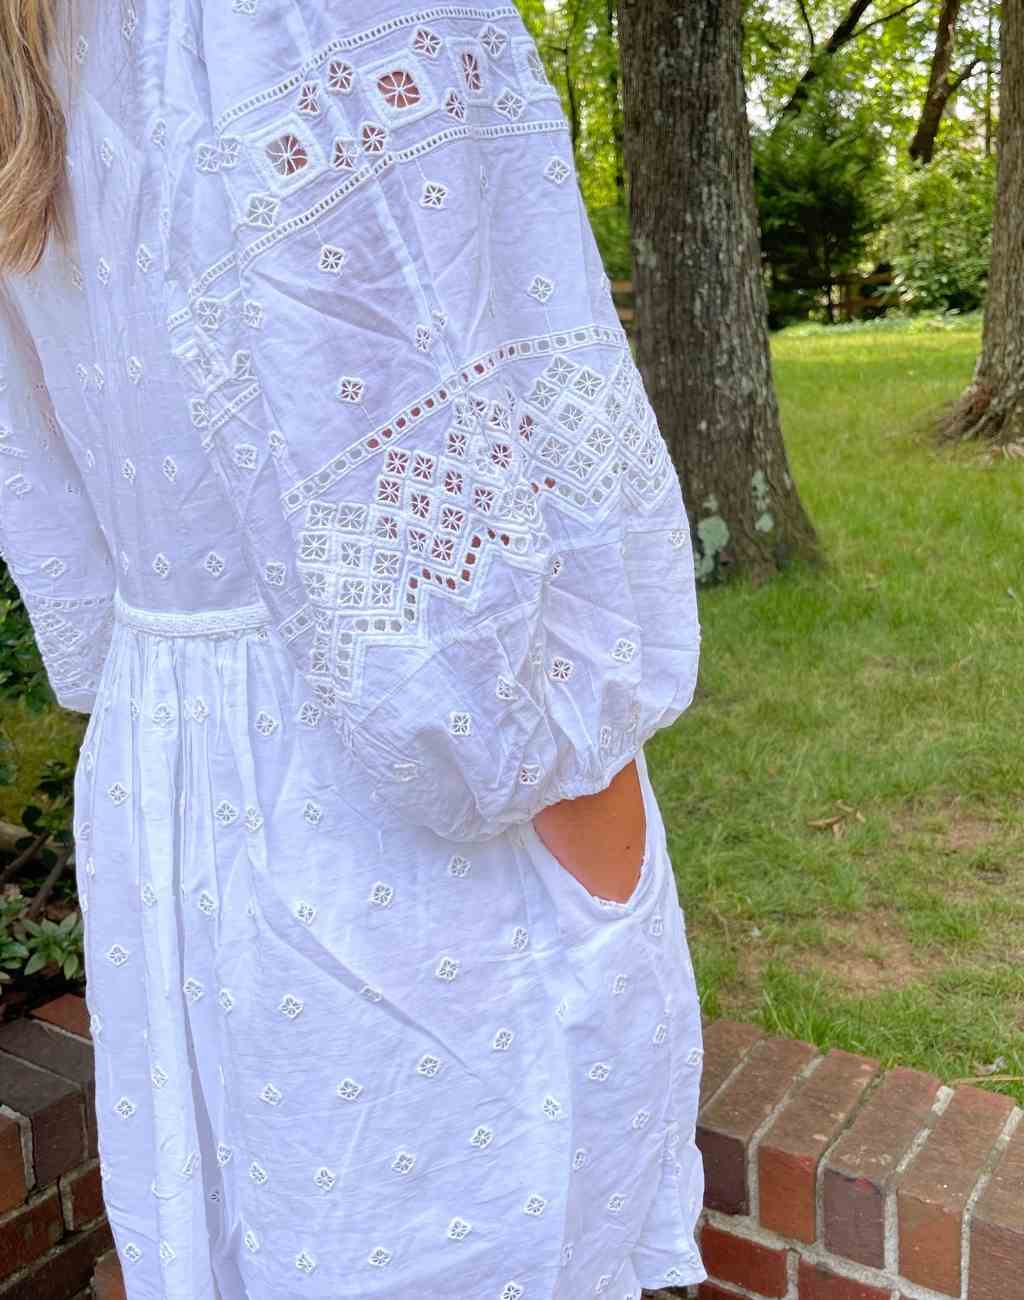 Vintage Inspired Crisp White Short Dress with Broderie Anglaise Details